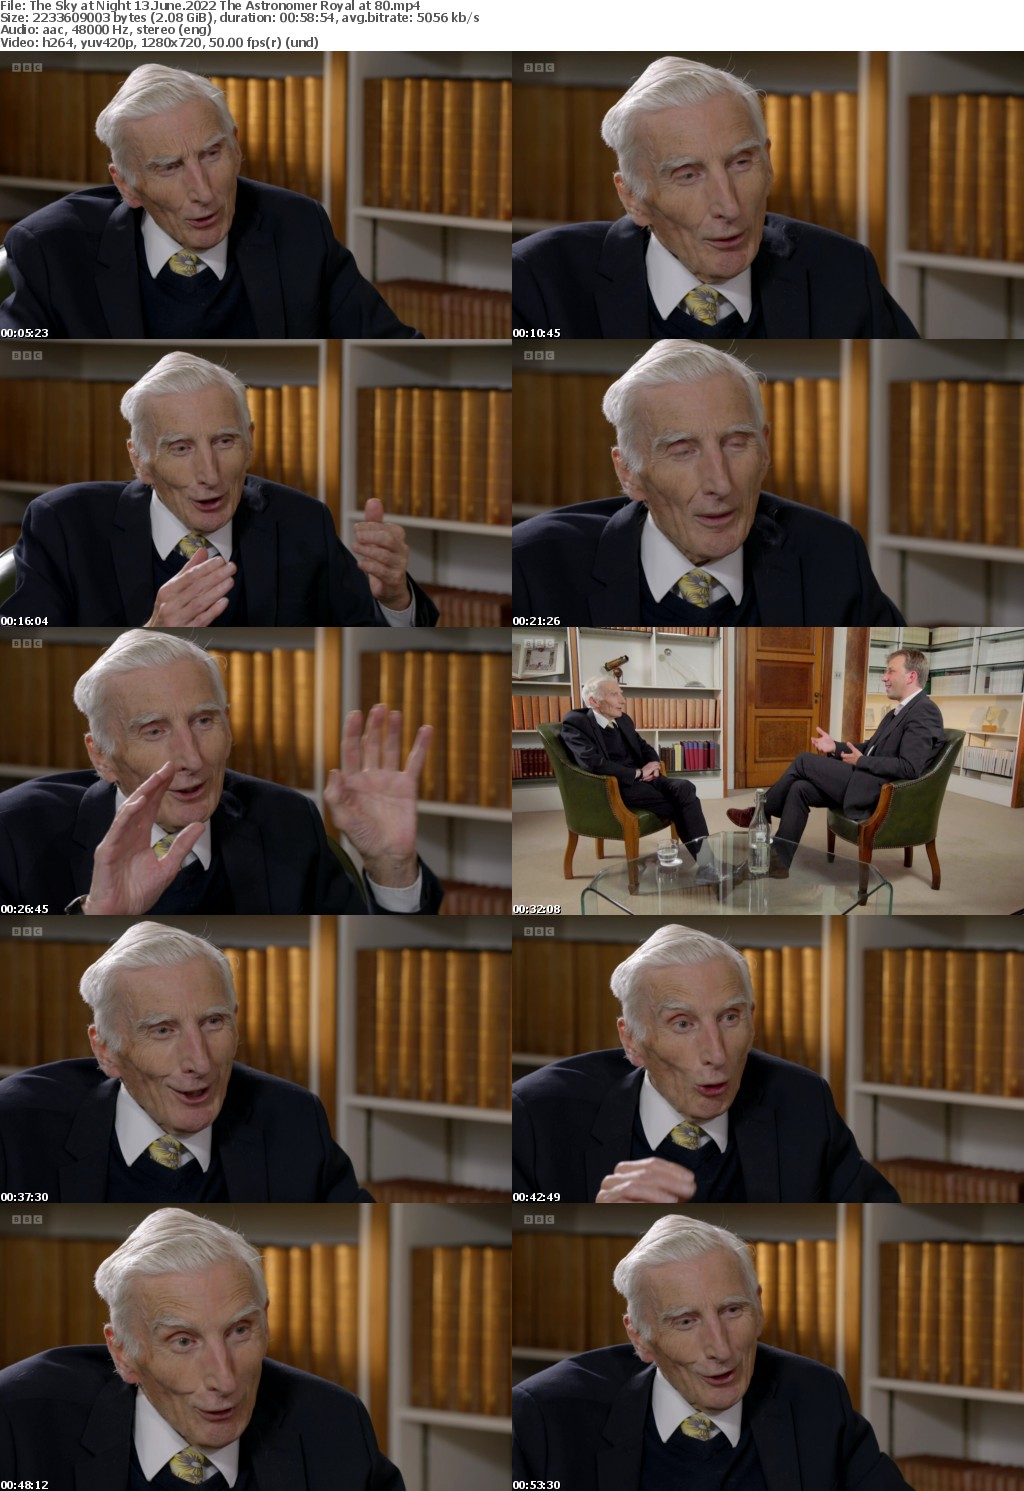 The Sky at Night 13 June 2022 The Astronomer Royal at 80 (1280x720p HD, 50fps, soft Eng subs)